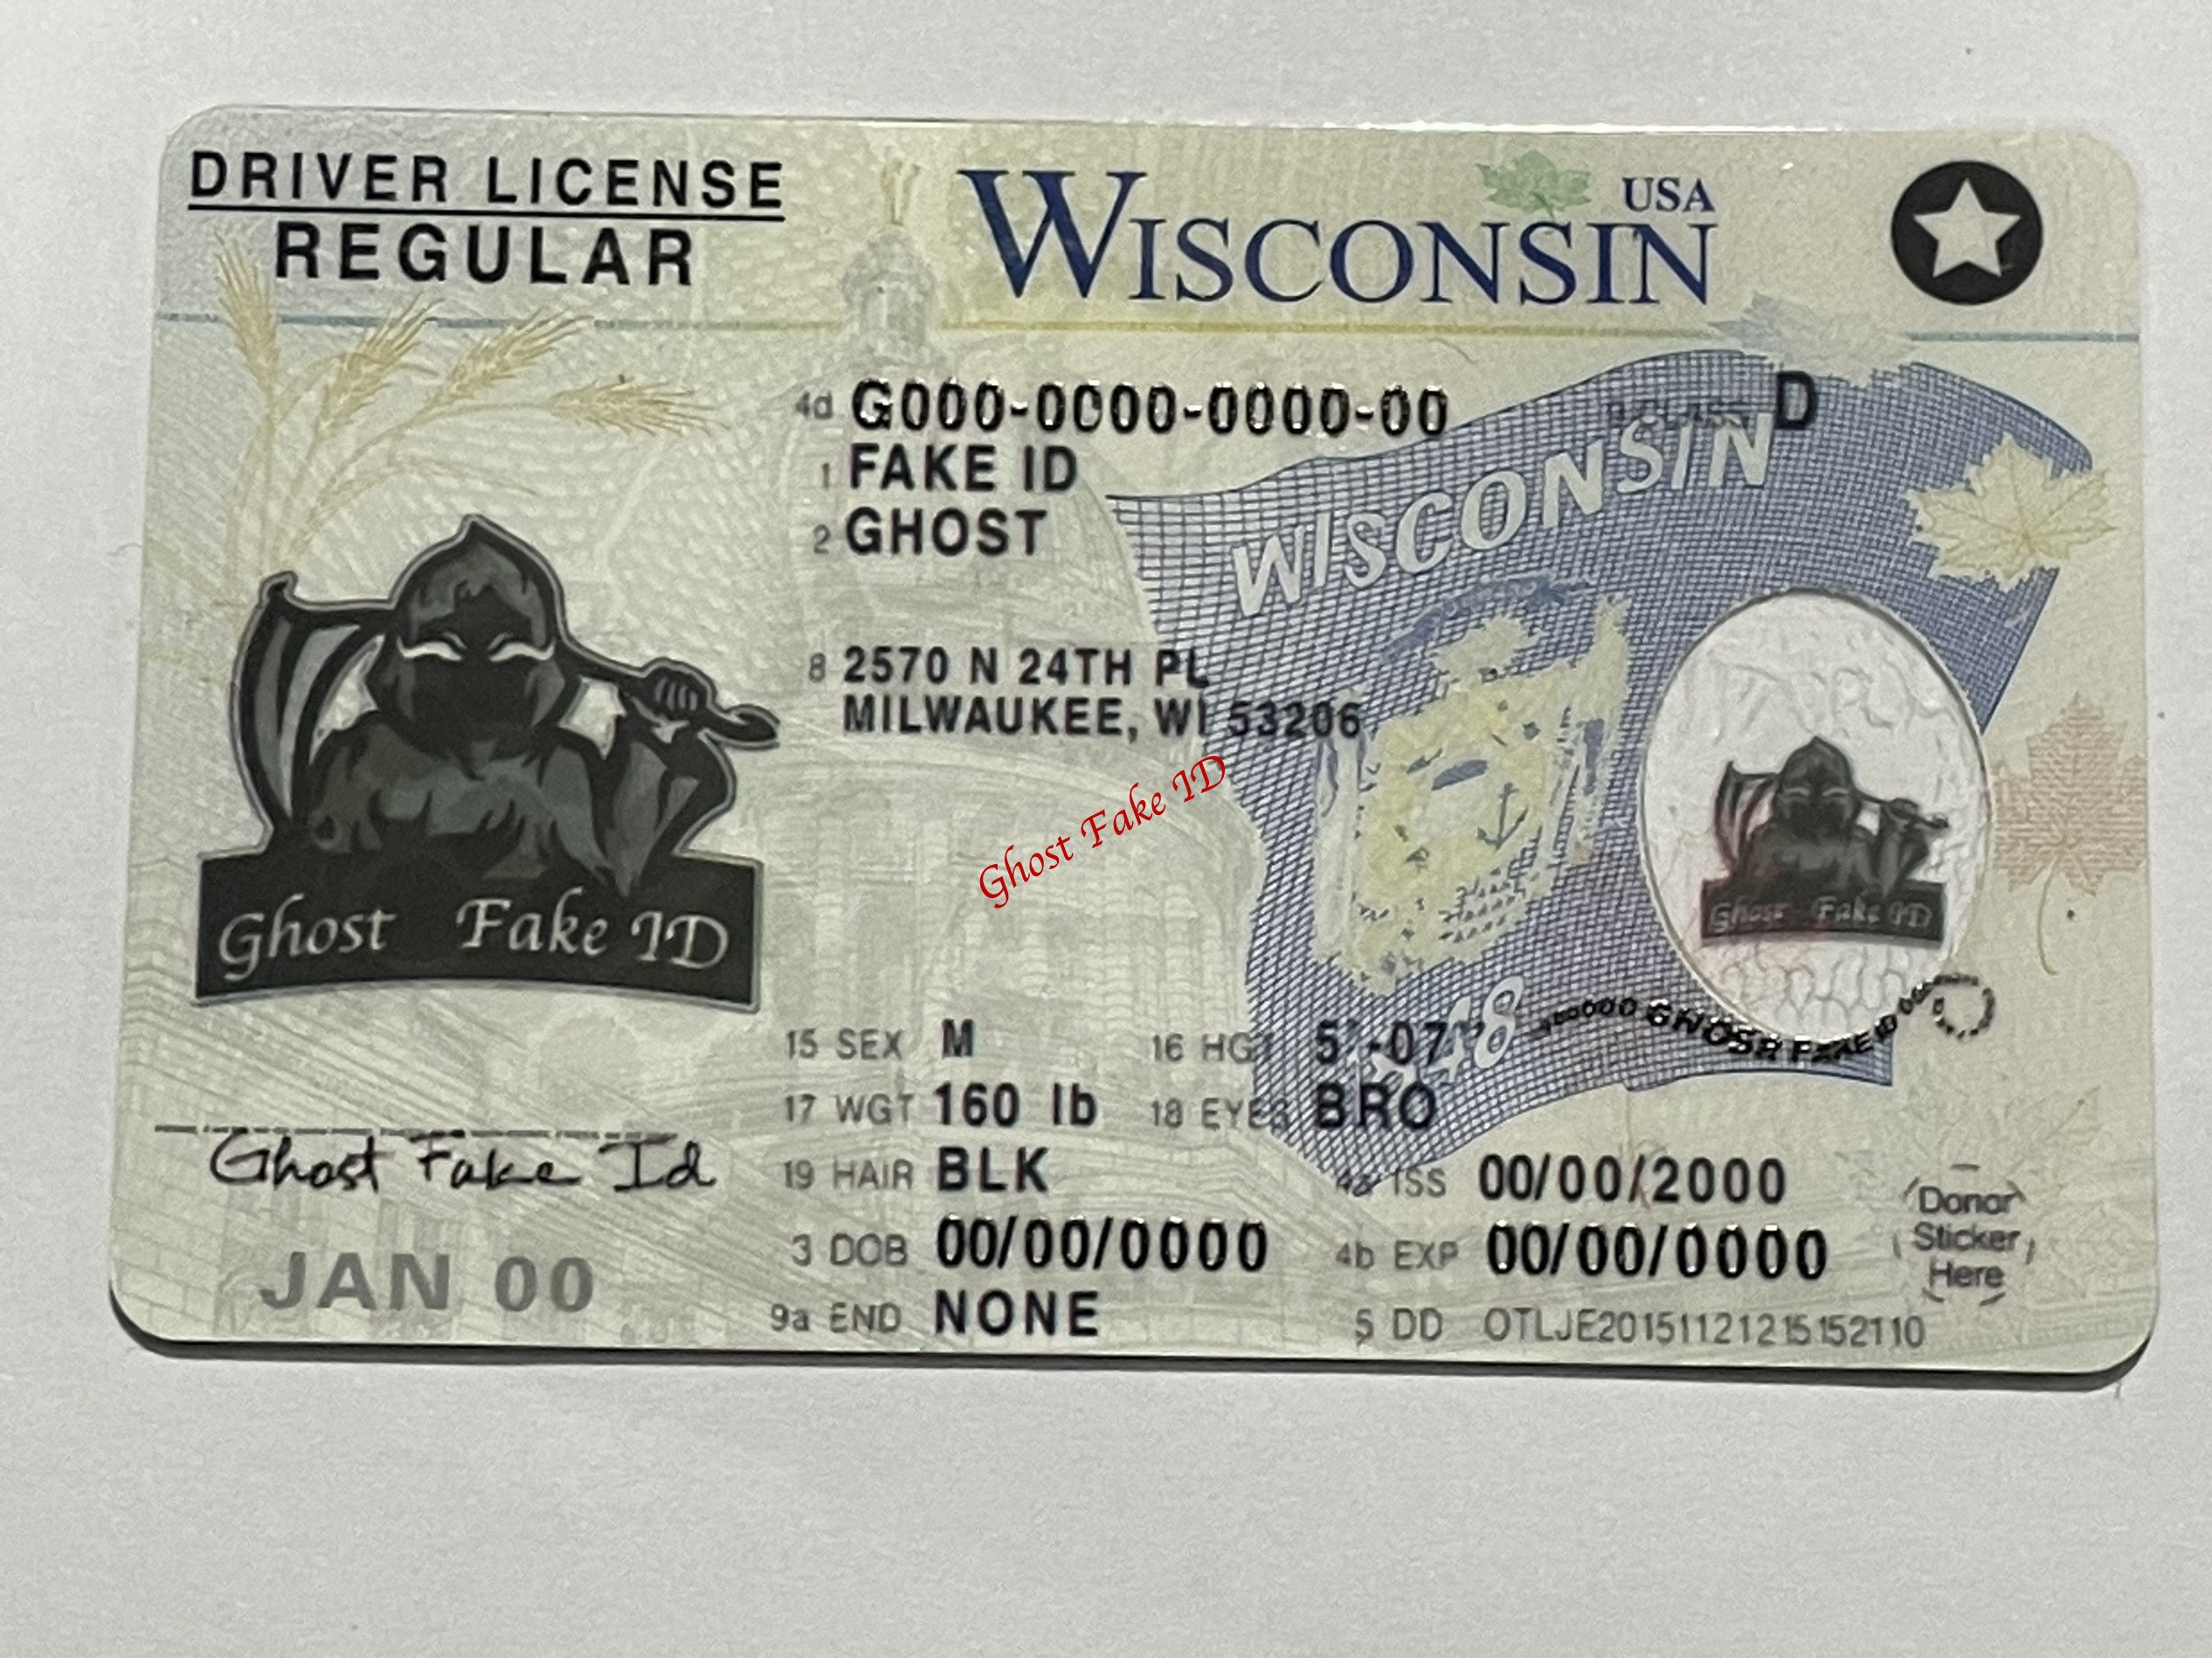 Wisconsin - Scanable fake id